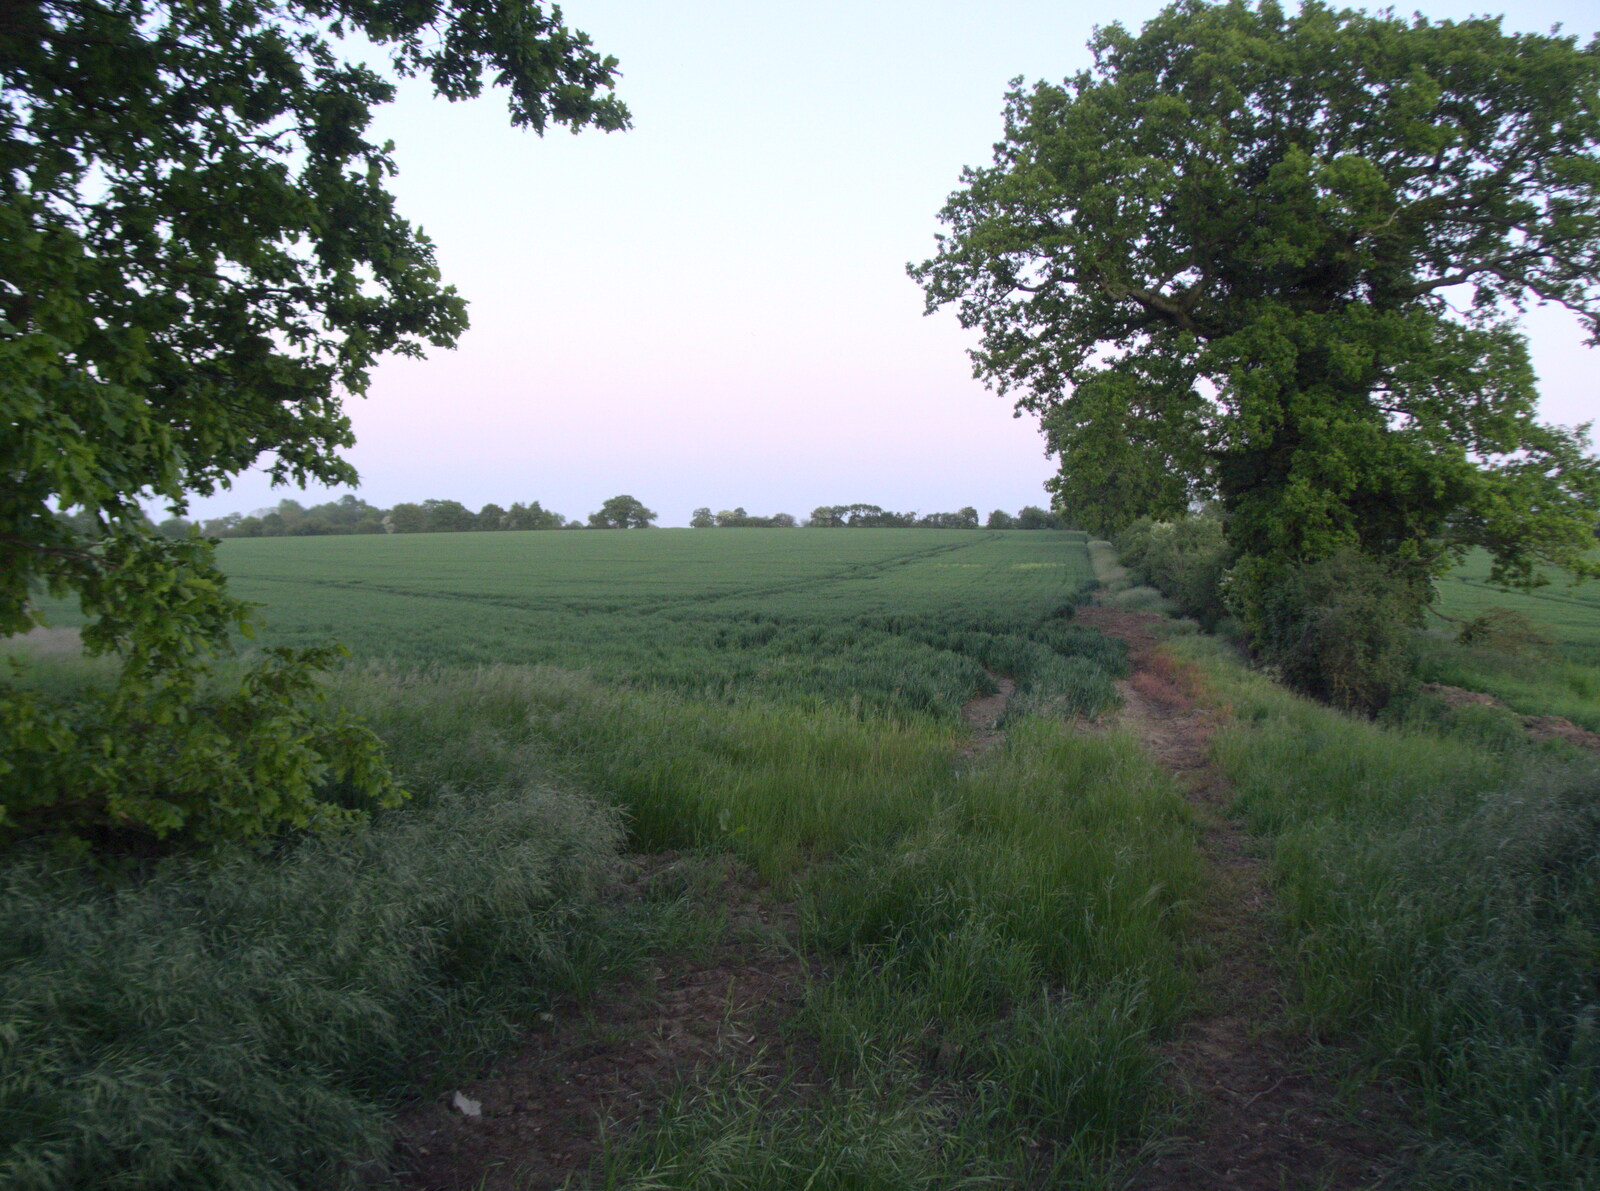 It's a nice evening for a wee in a field from The BSCC at Rushall, South Lopham and Redgrave - 25th May 2023